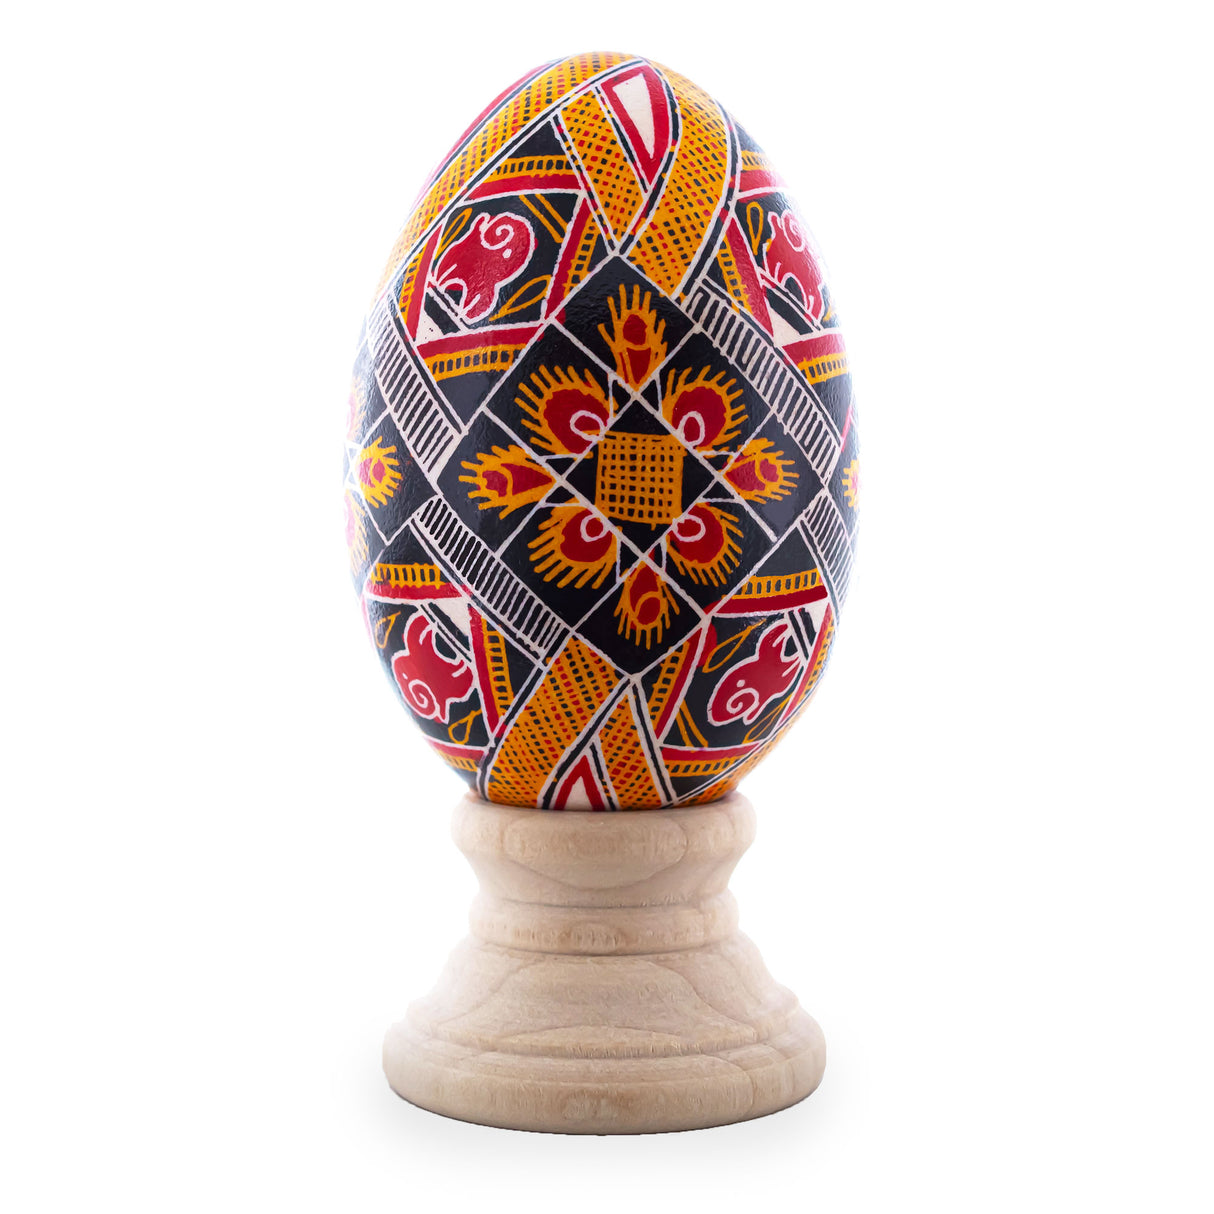 Eggshell Goose Real Blown Out Ukrainian Easter Egg 6 in Multi color Oval